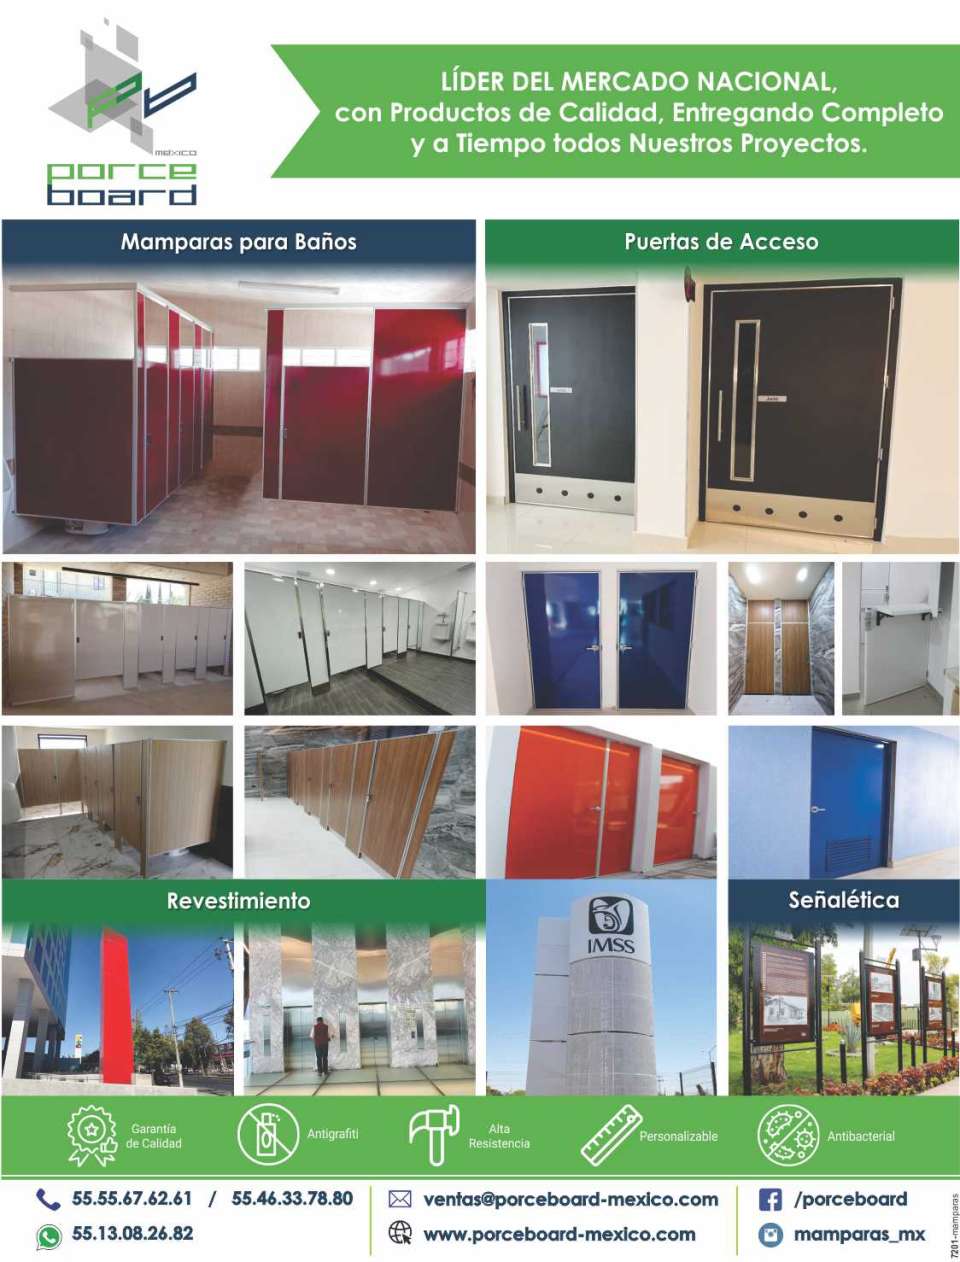 Manufacturer of Screens for Bathrooms, Access Doors, Signs and Architectural Coatings, Facade Coatings. Market leader. Quality Products.